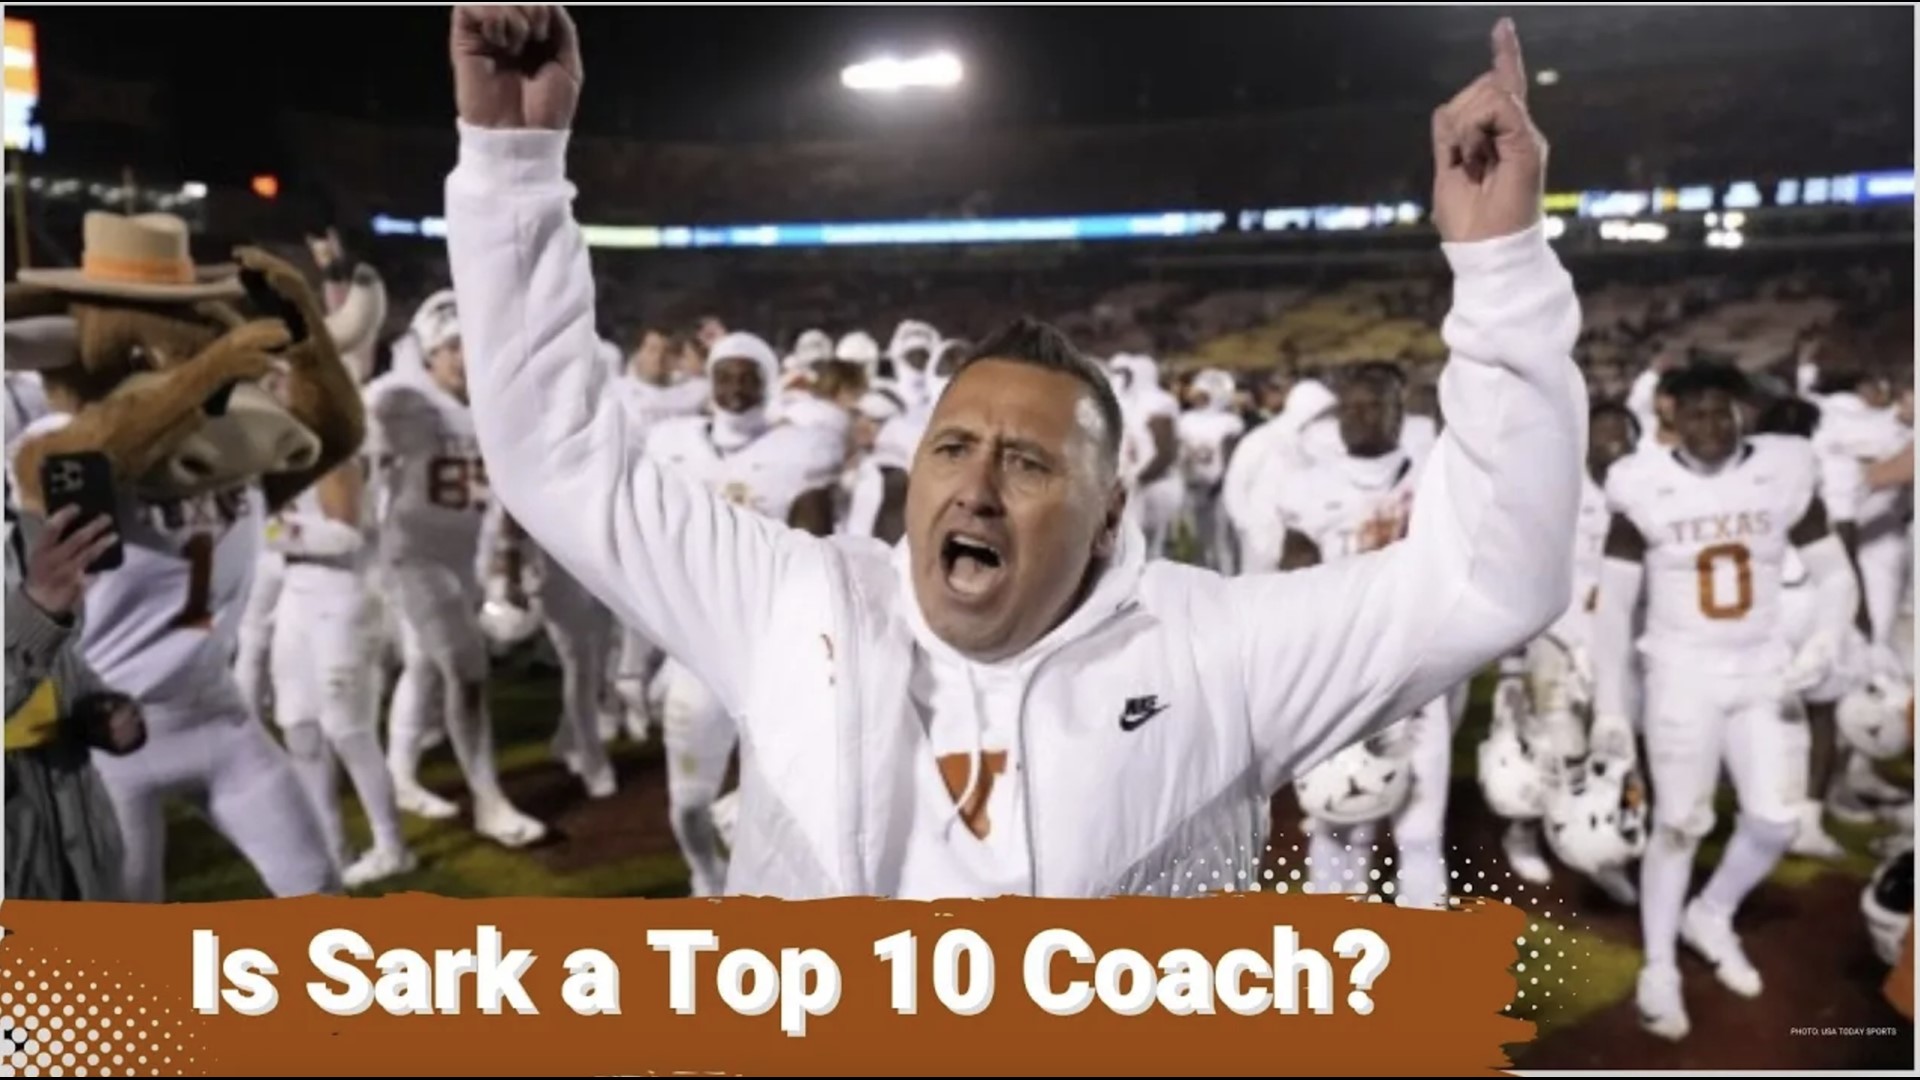 Steve Sarkisian's turnaround job at the University of Texas, is the type they write books about (Yes I'm exaggerating).